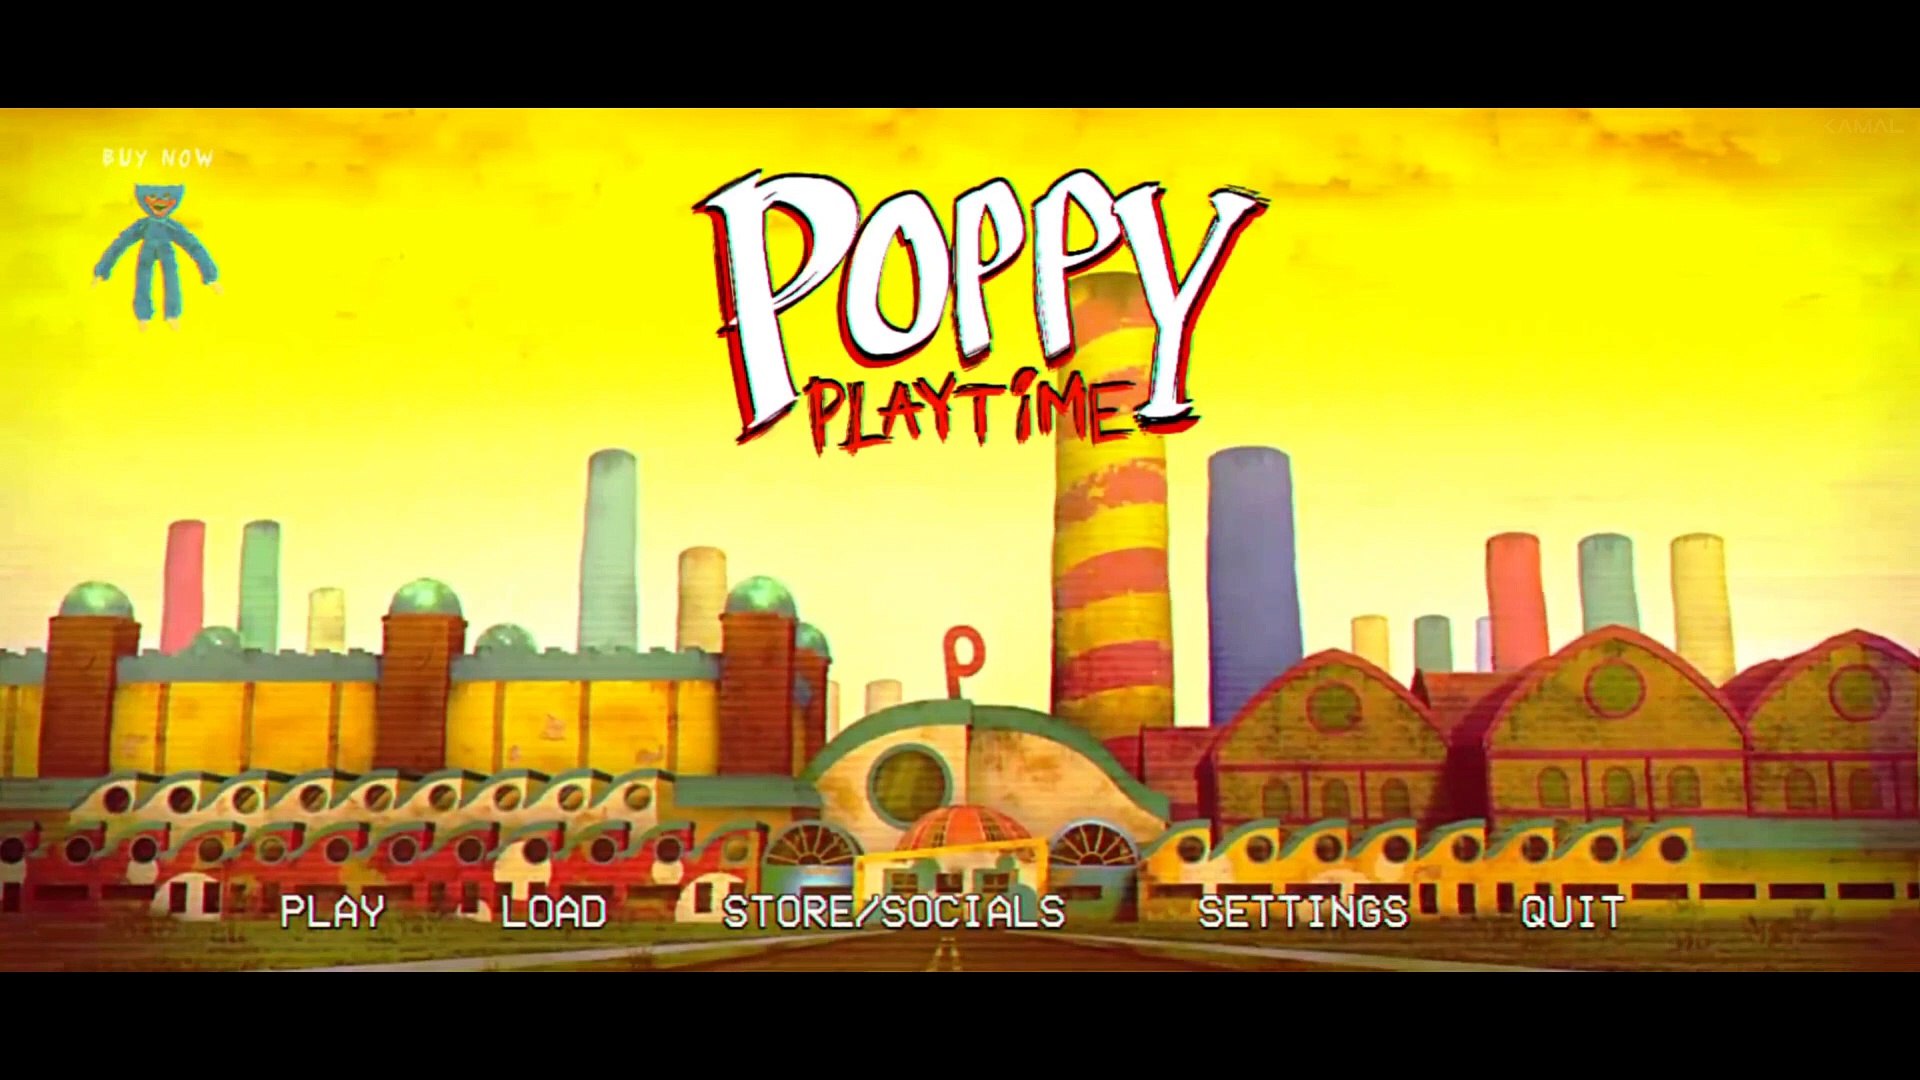 Poppy Playtime Mobile Is Now Available On iOS and Android